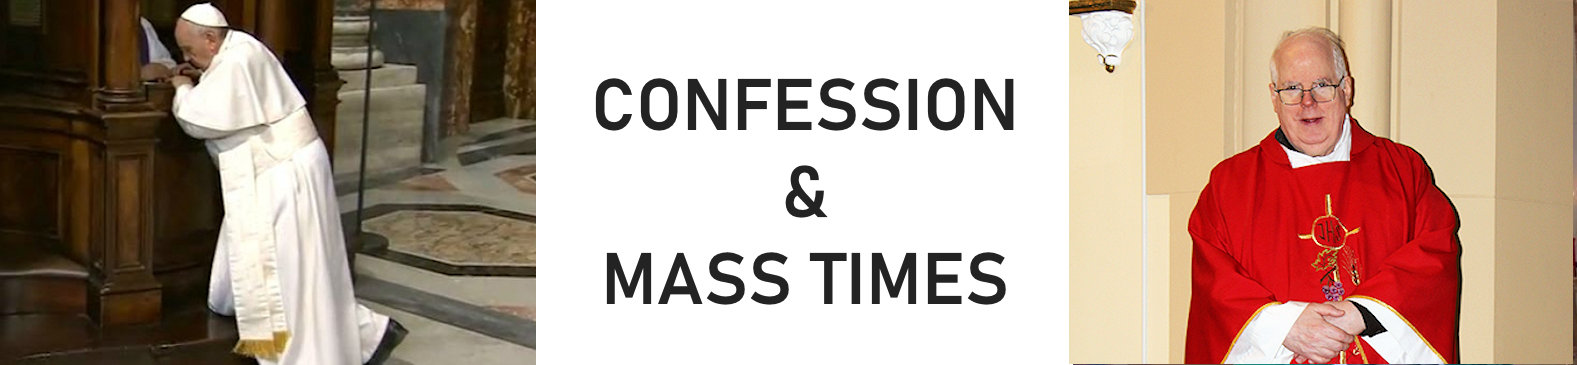 Reconciliation & Mass Times Banner